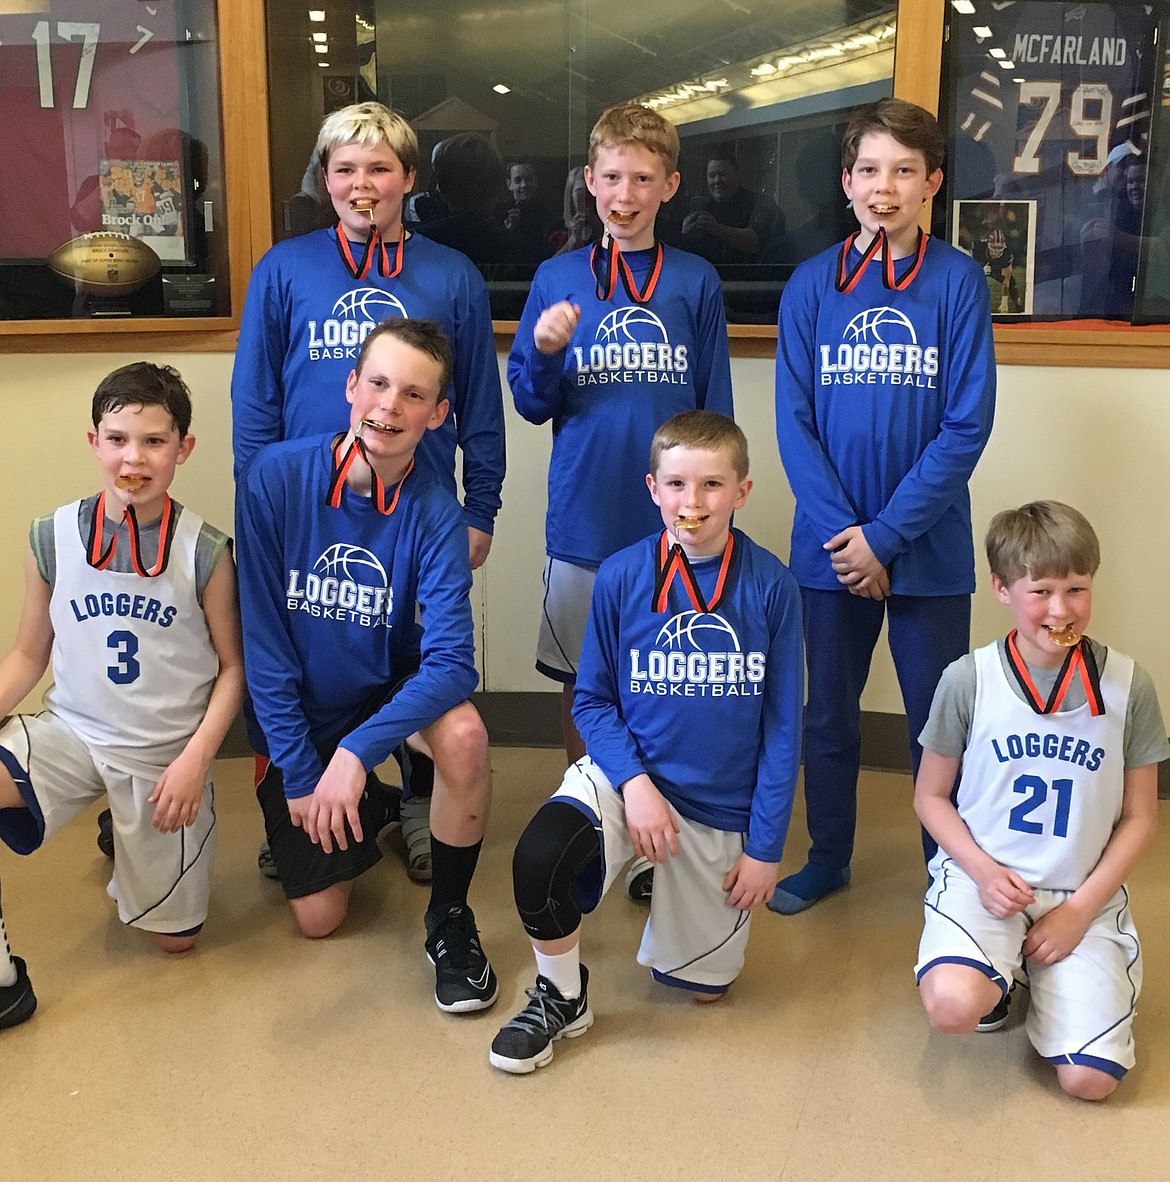 The 6th, 7th and 8th grade Boys Rotary Basketball Teams placed first in their divisions at the Flathead Hoopfest in Kalispell, April 7-8. Pictured is the 6th grade team: (Front) Tyler Andersen, Chayse Hartley, Ryan Beagle and Tristen Andersen; (Back) Talon Woody, Cy Williams and Jake Welch. (Courtesy photo)